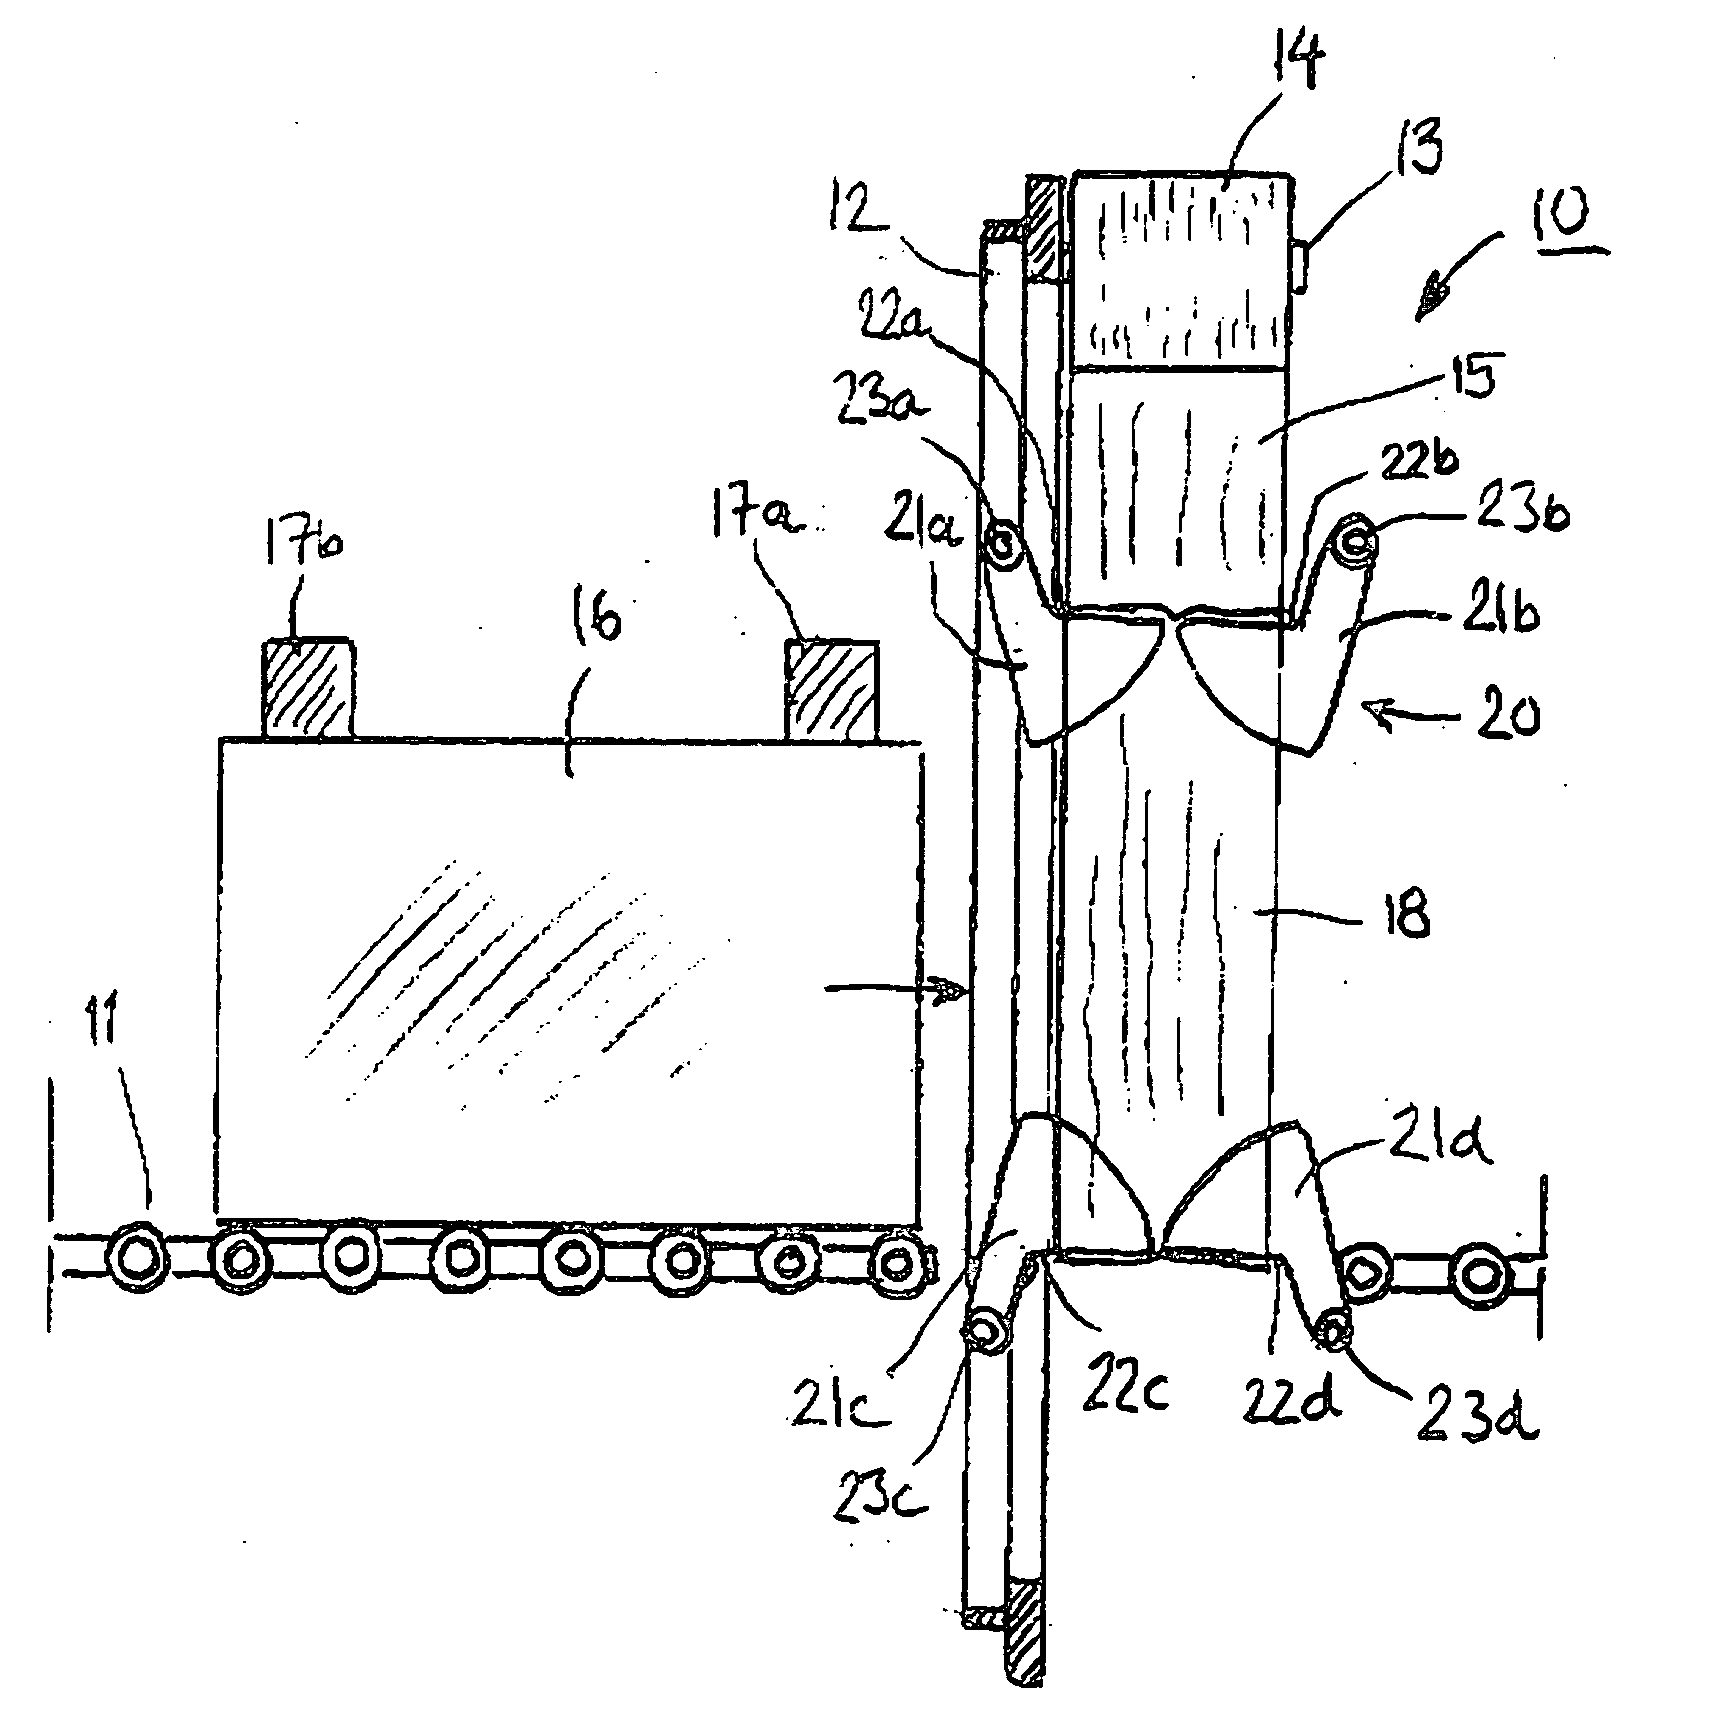 Method and device for applying a plastic film around a product to be packaged